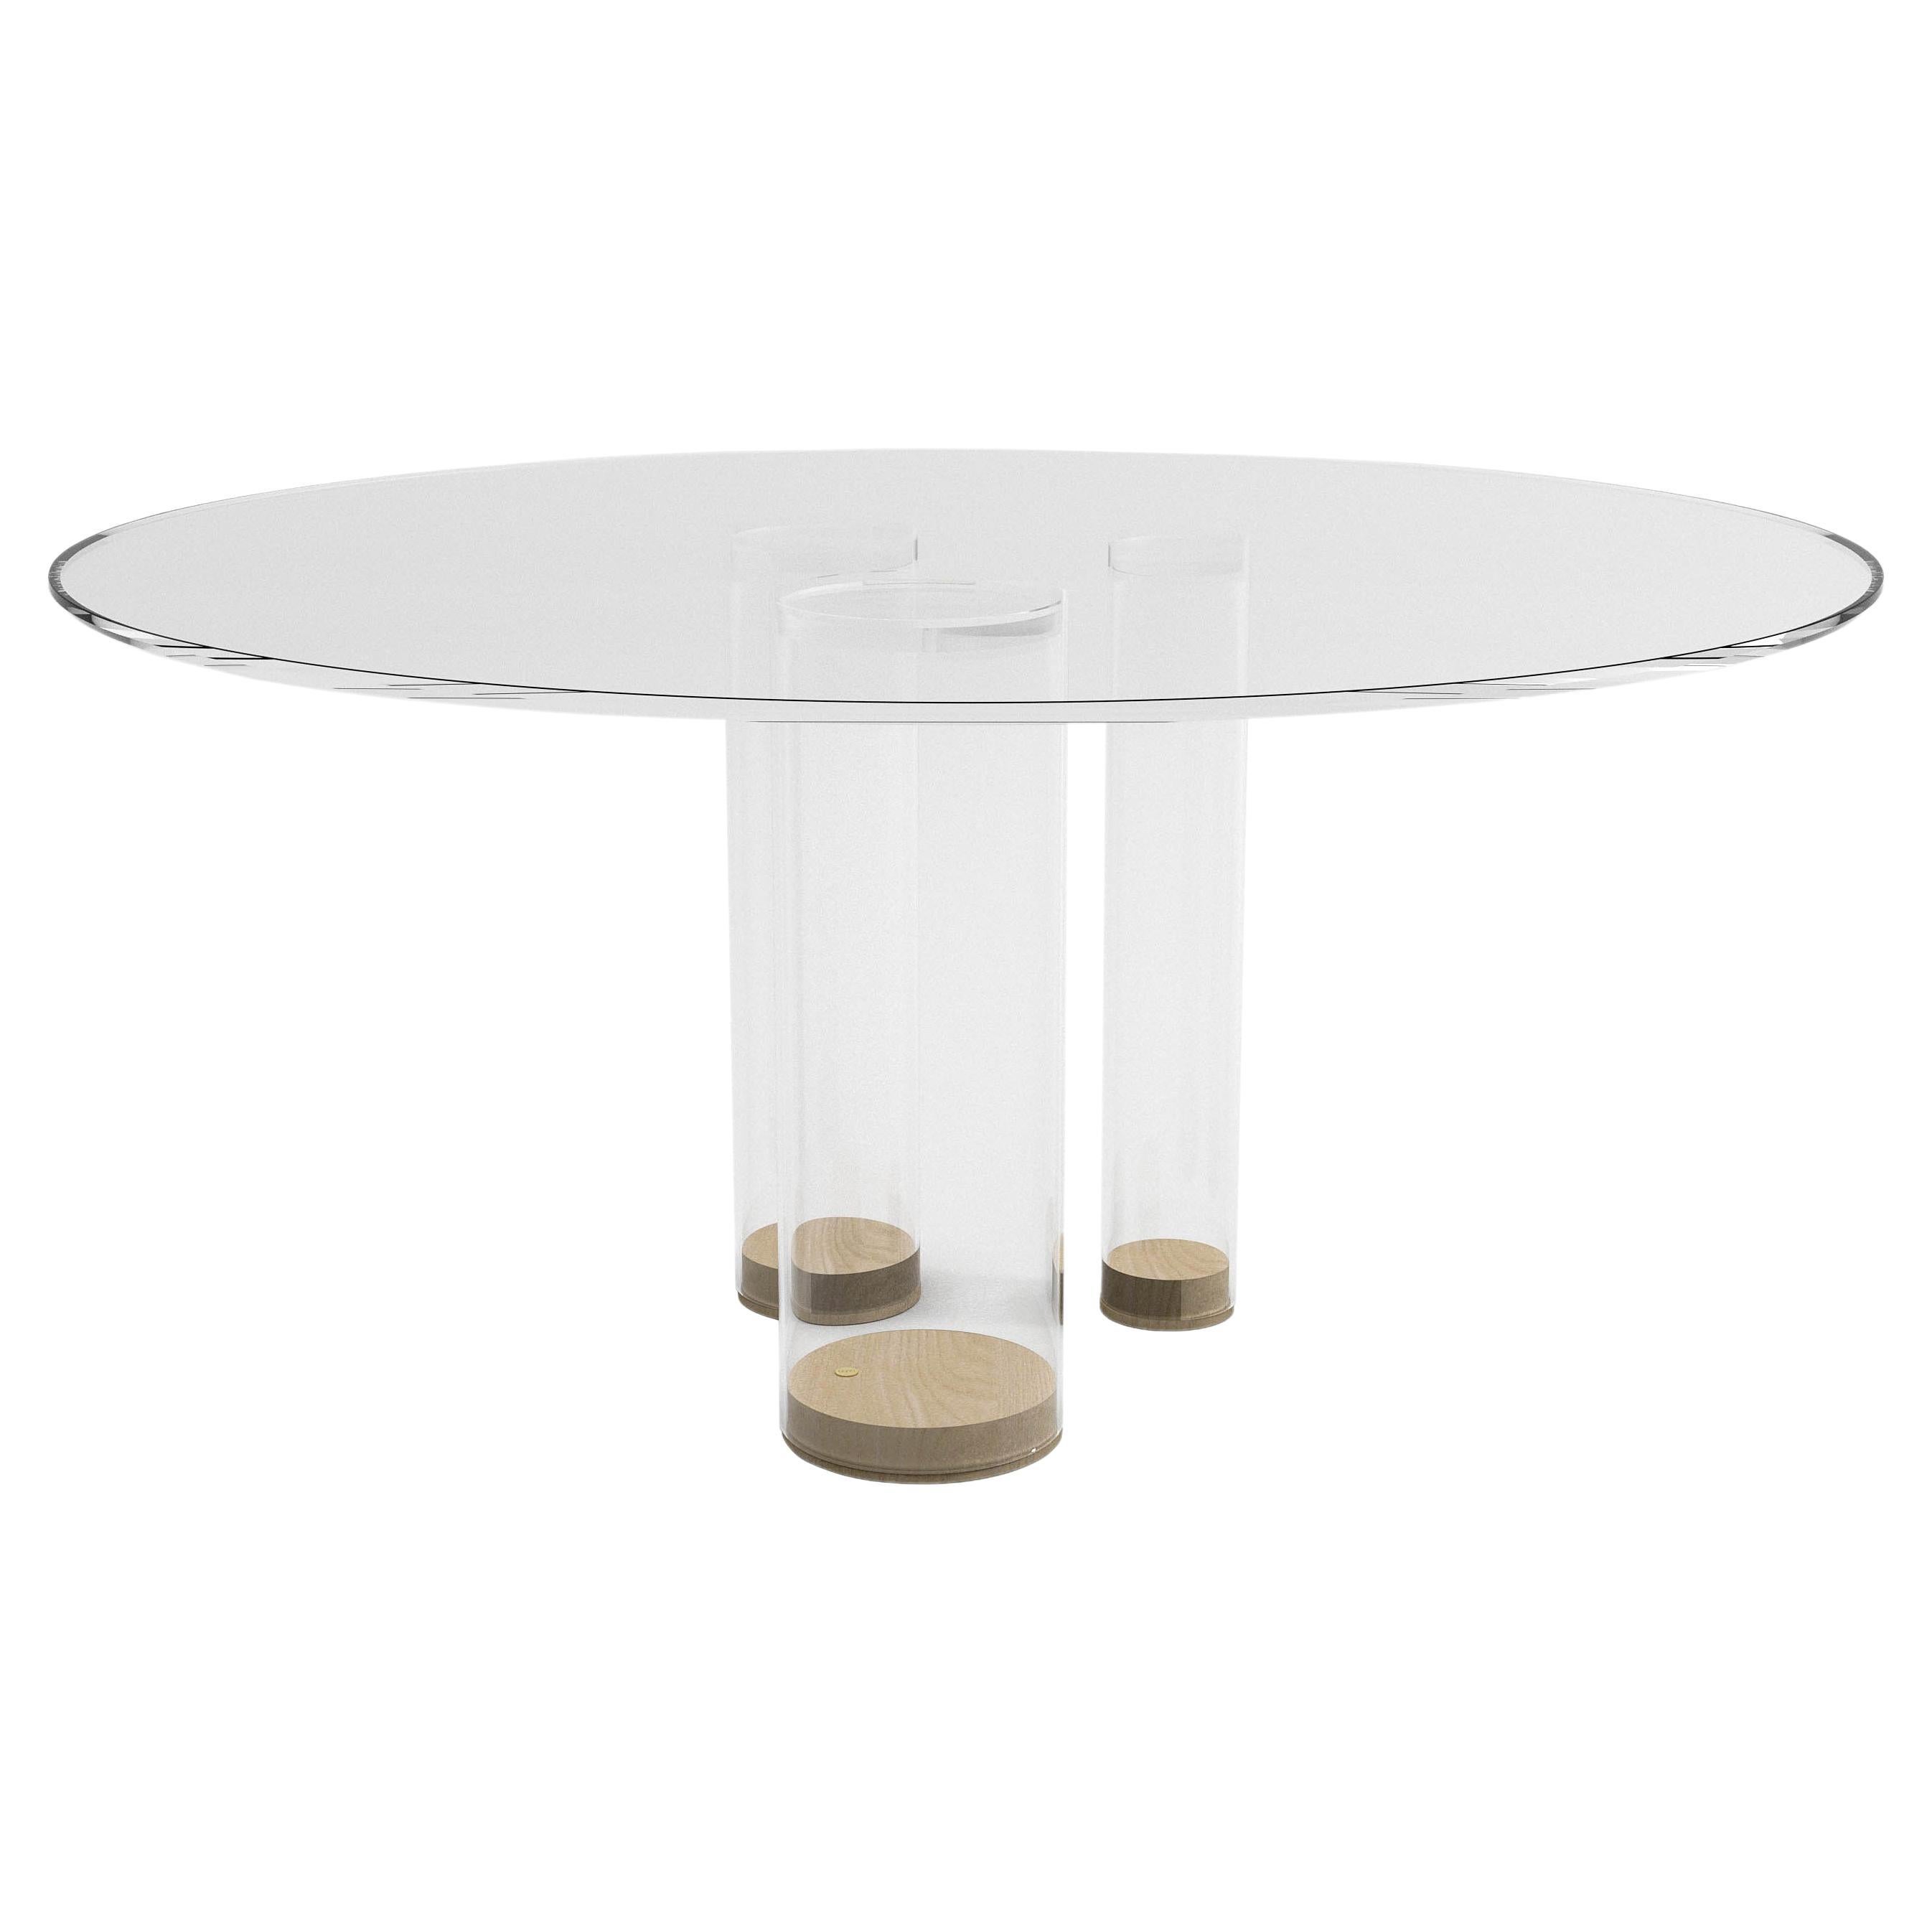 Contemporary round dining table, white glass & natural oak wood, Belgian design For Sale